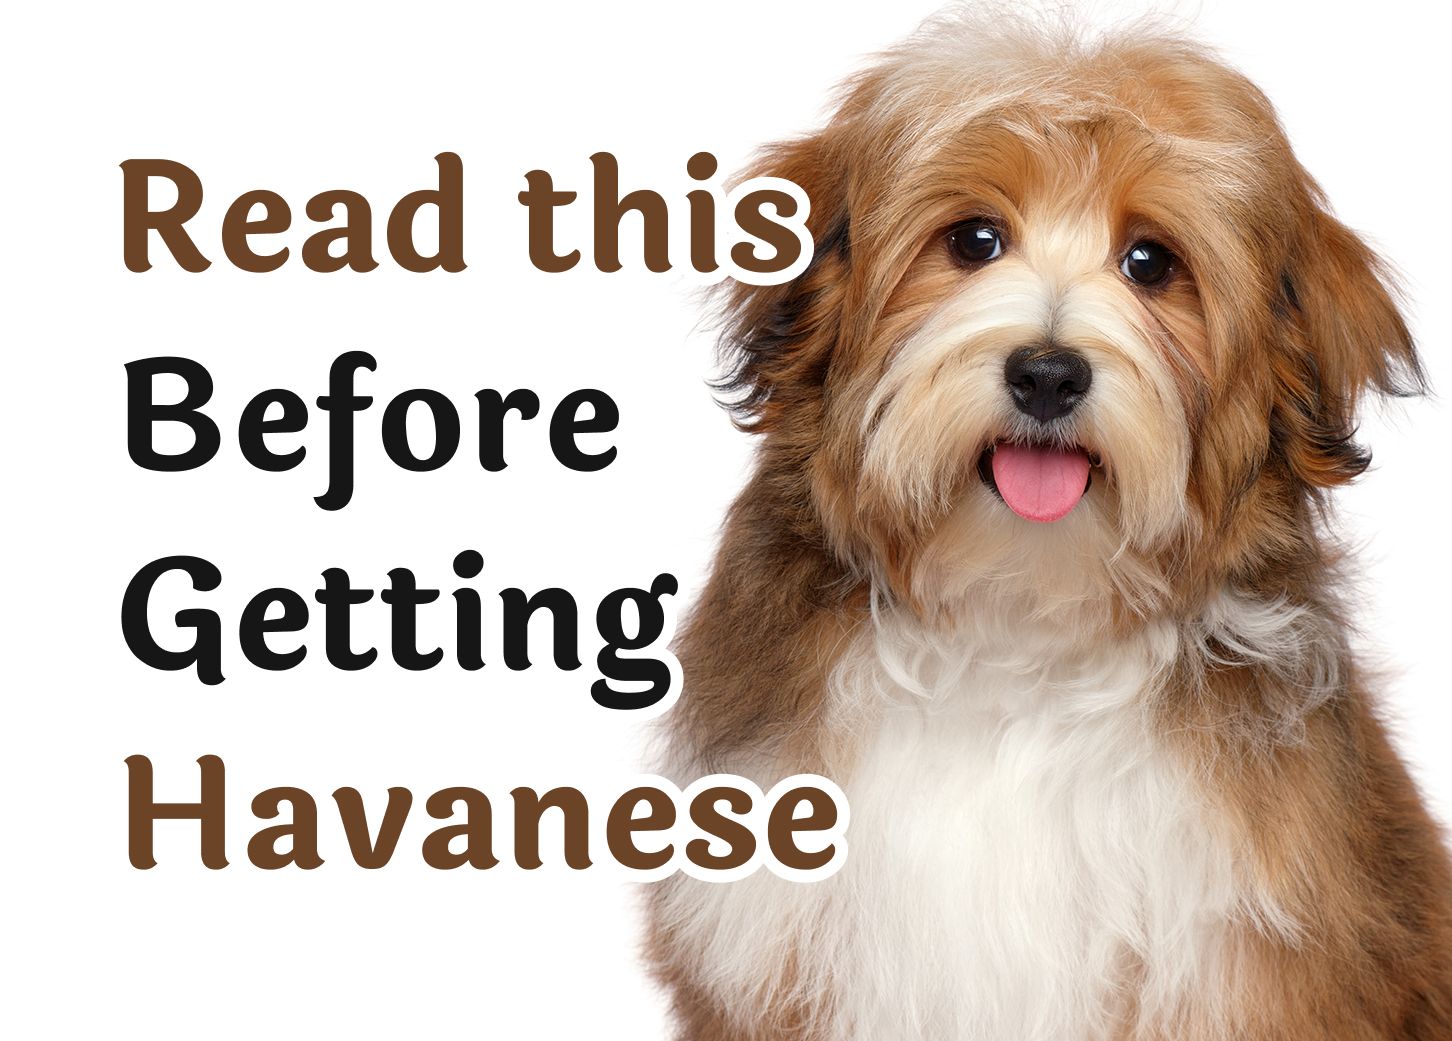 Consider These 25 Questions Before Getting a Havanese Dog